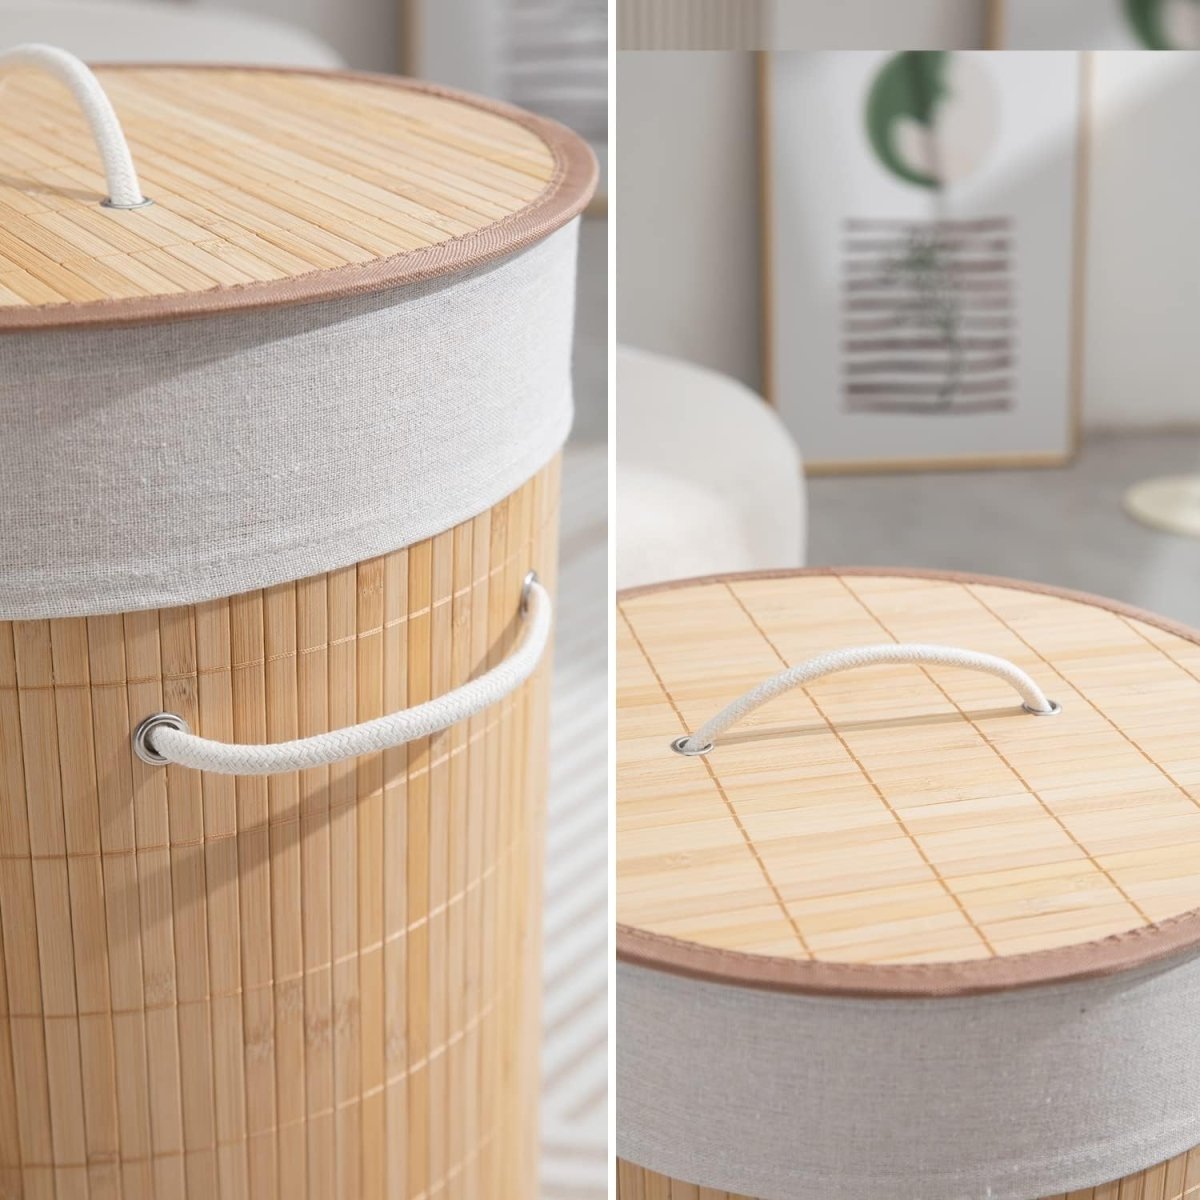 Round Bamboo Laundry Basket With Lid (35CM*60CM) Laundry Bag- #Royalkart#brown lid basket